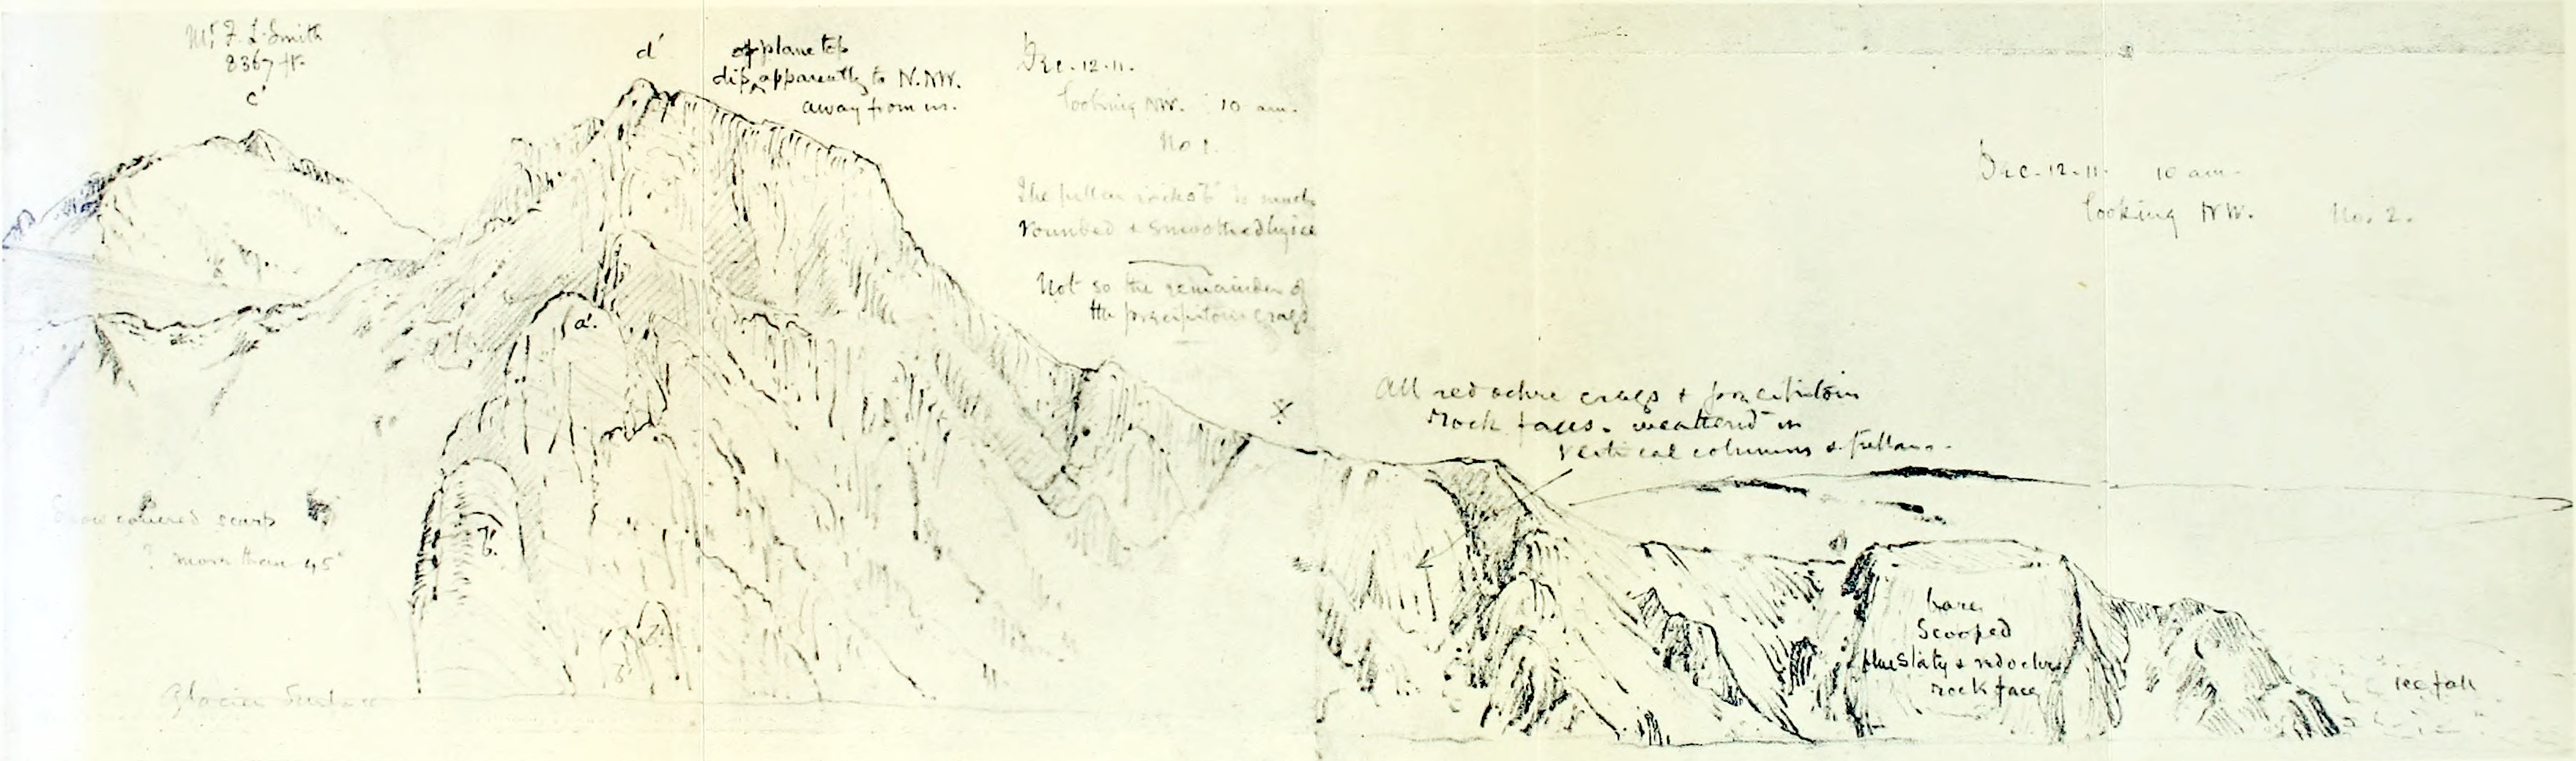 Fold-out panoramic sketch of mountains with handwritten notes